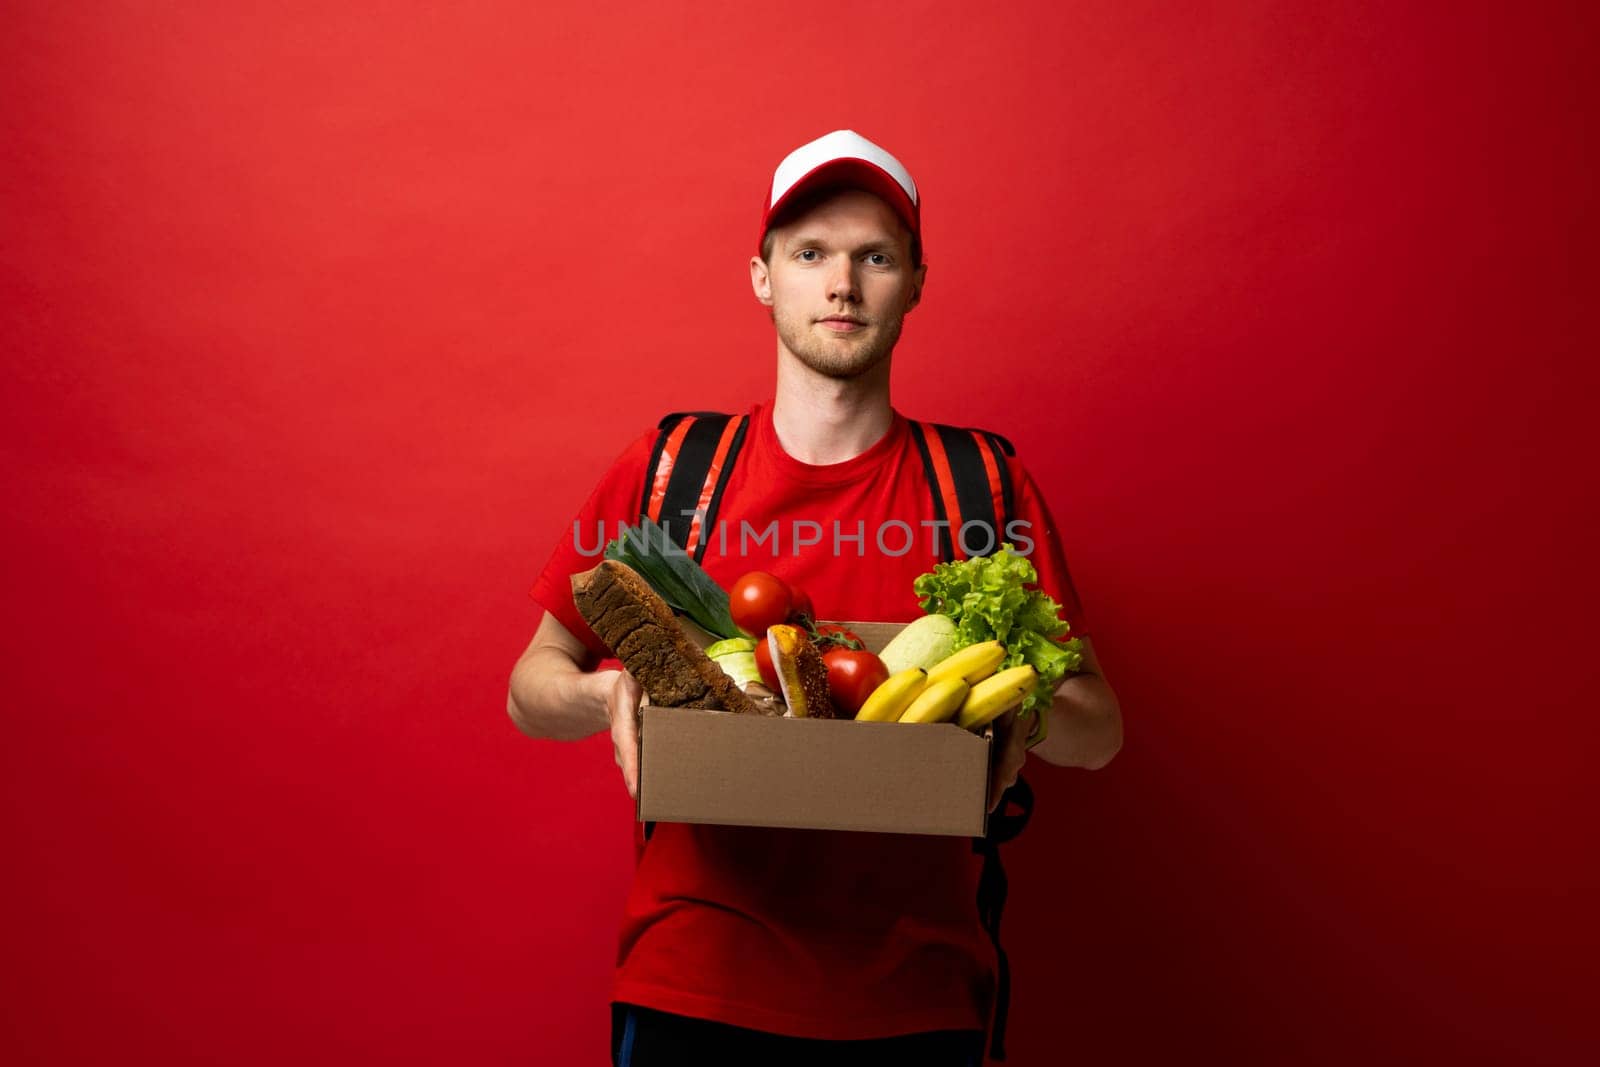 Courier in red uniform holds paper box of food, groceries. Delivery service, takeaway restaurants food delivery to home door